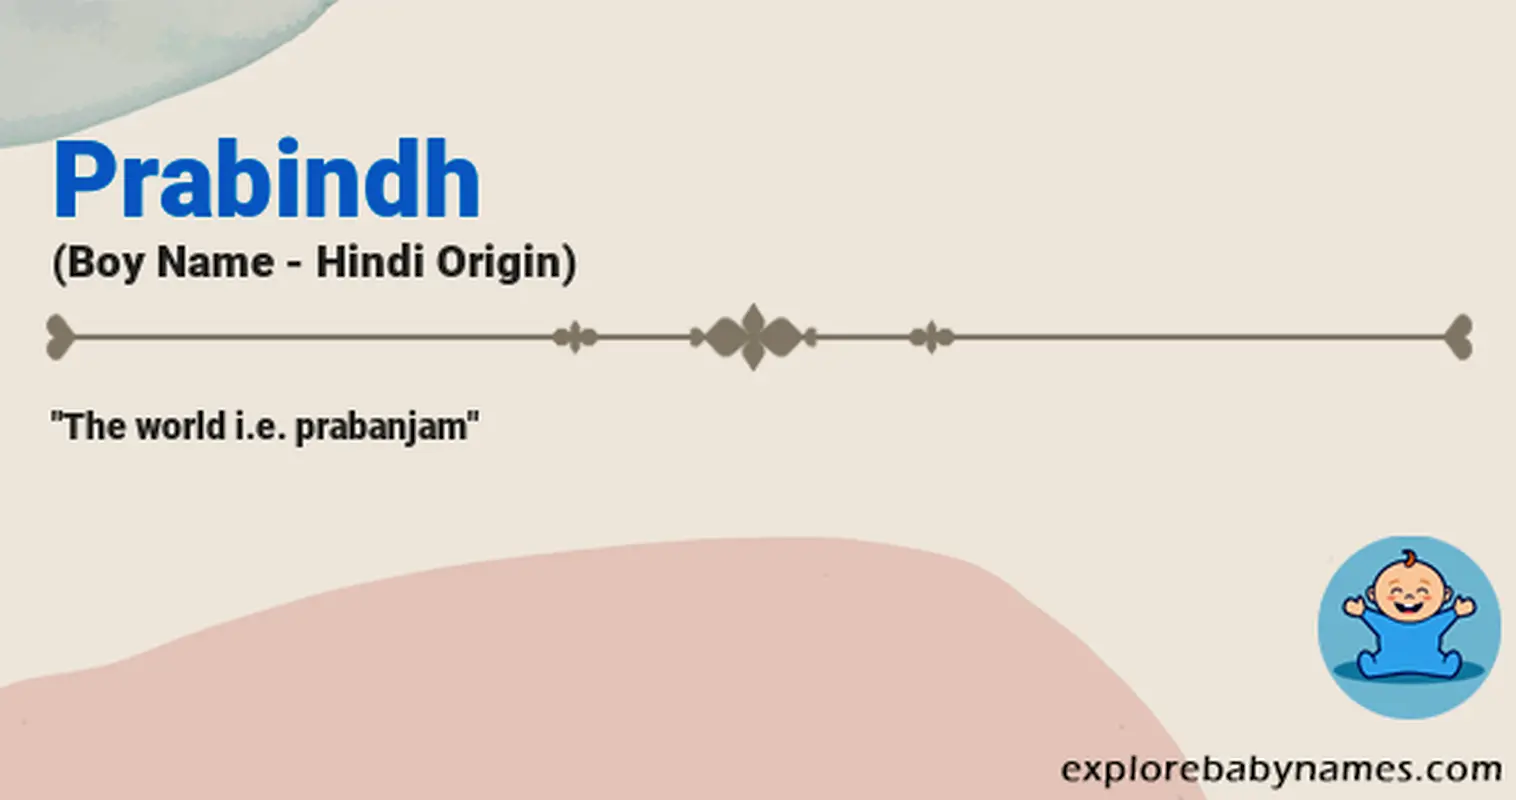 Meaning of Prabindh